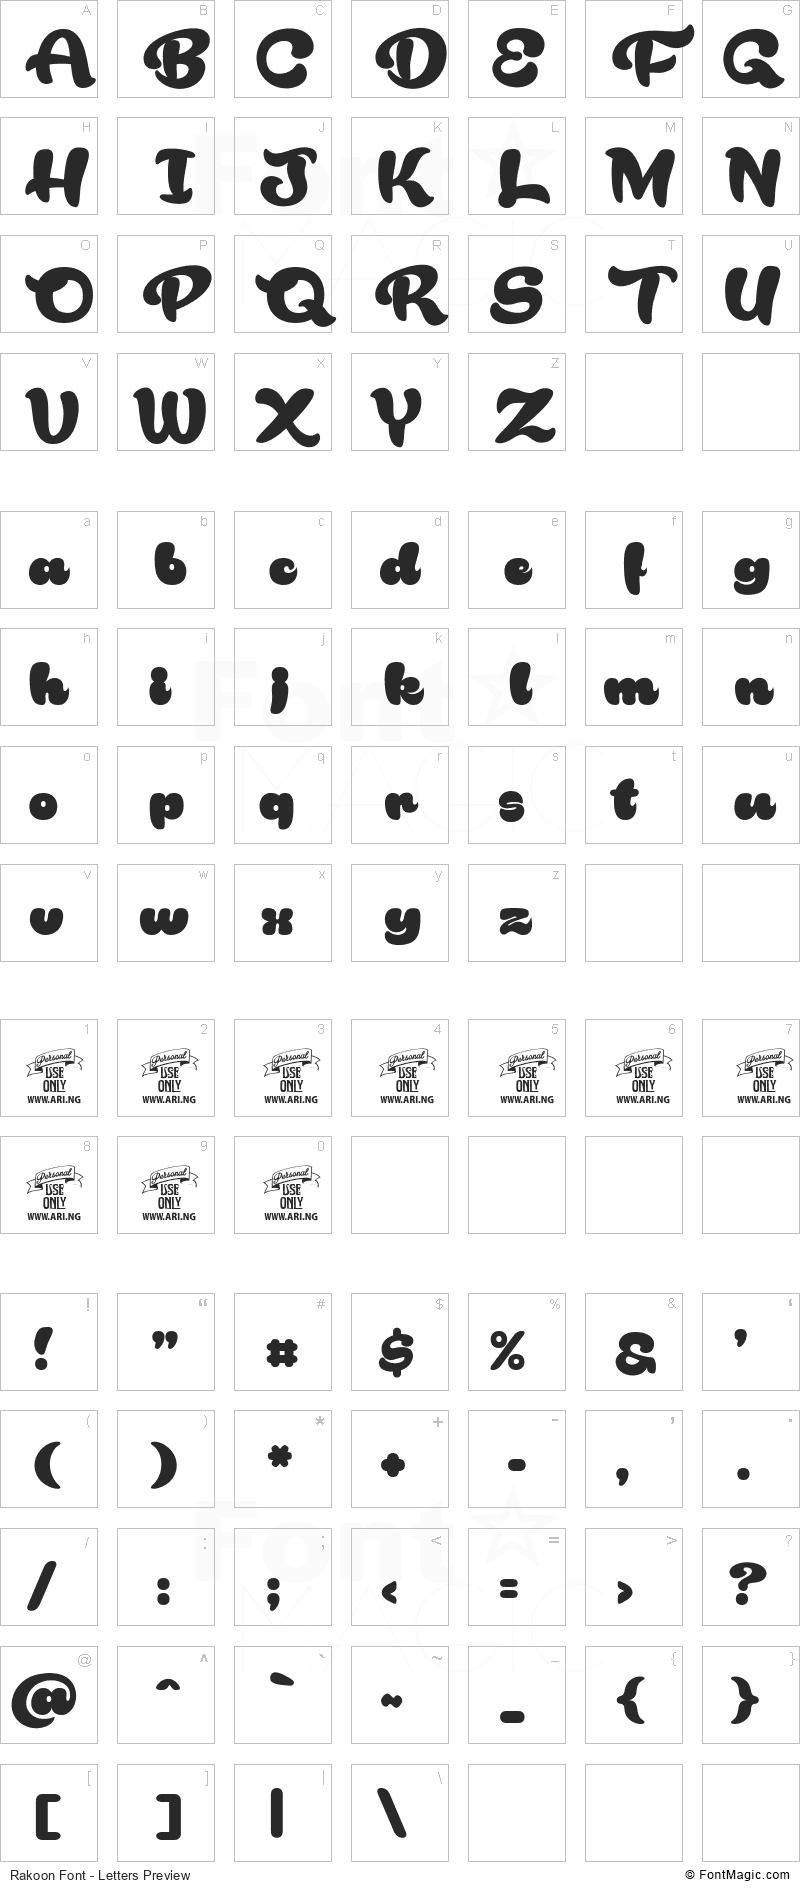 Rakoon Font - All Latters Preview Chart